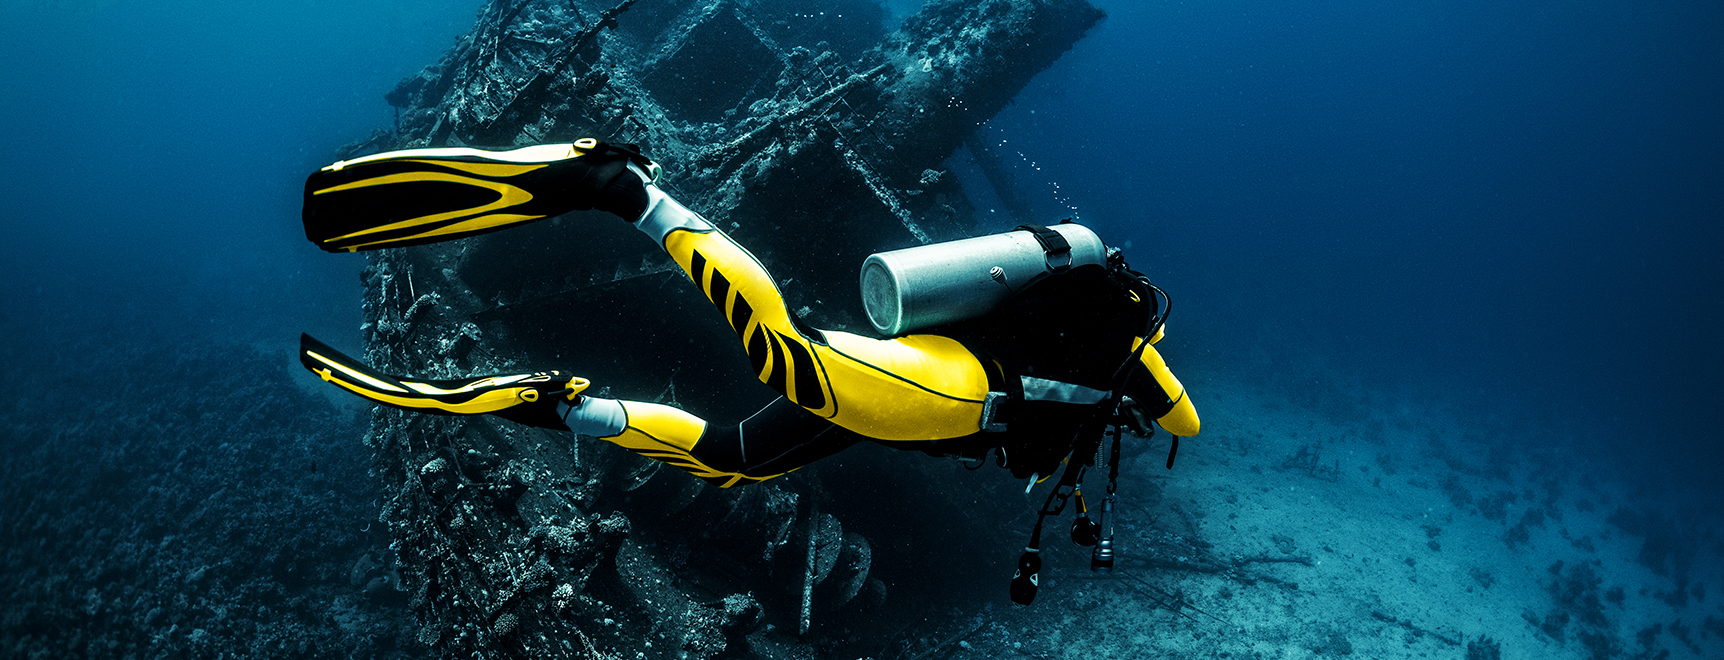 Scuba diver passing by a wreckage of a large sunken ship in the Red Sea.